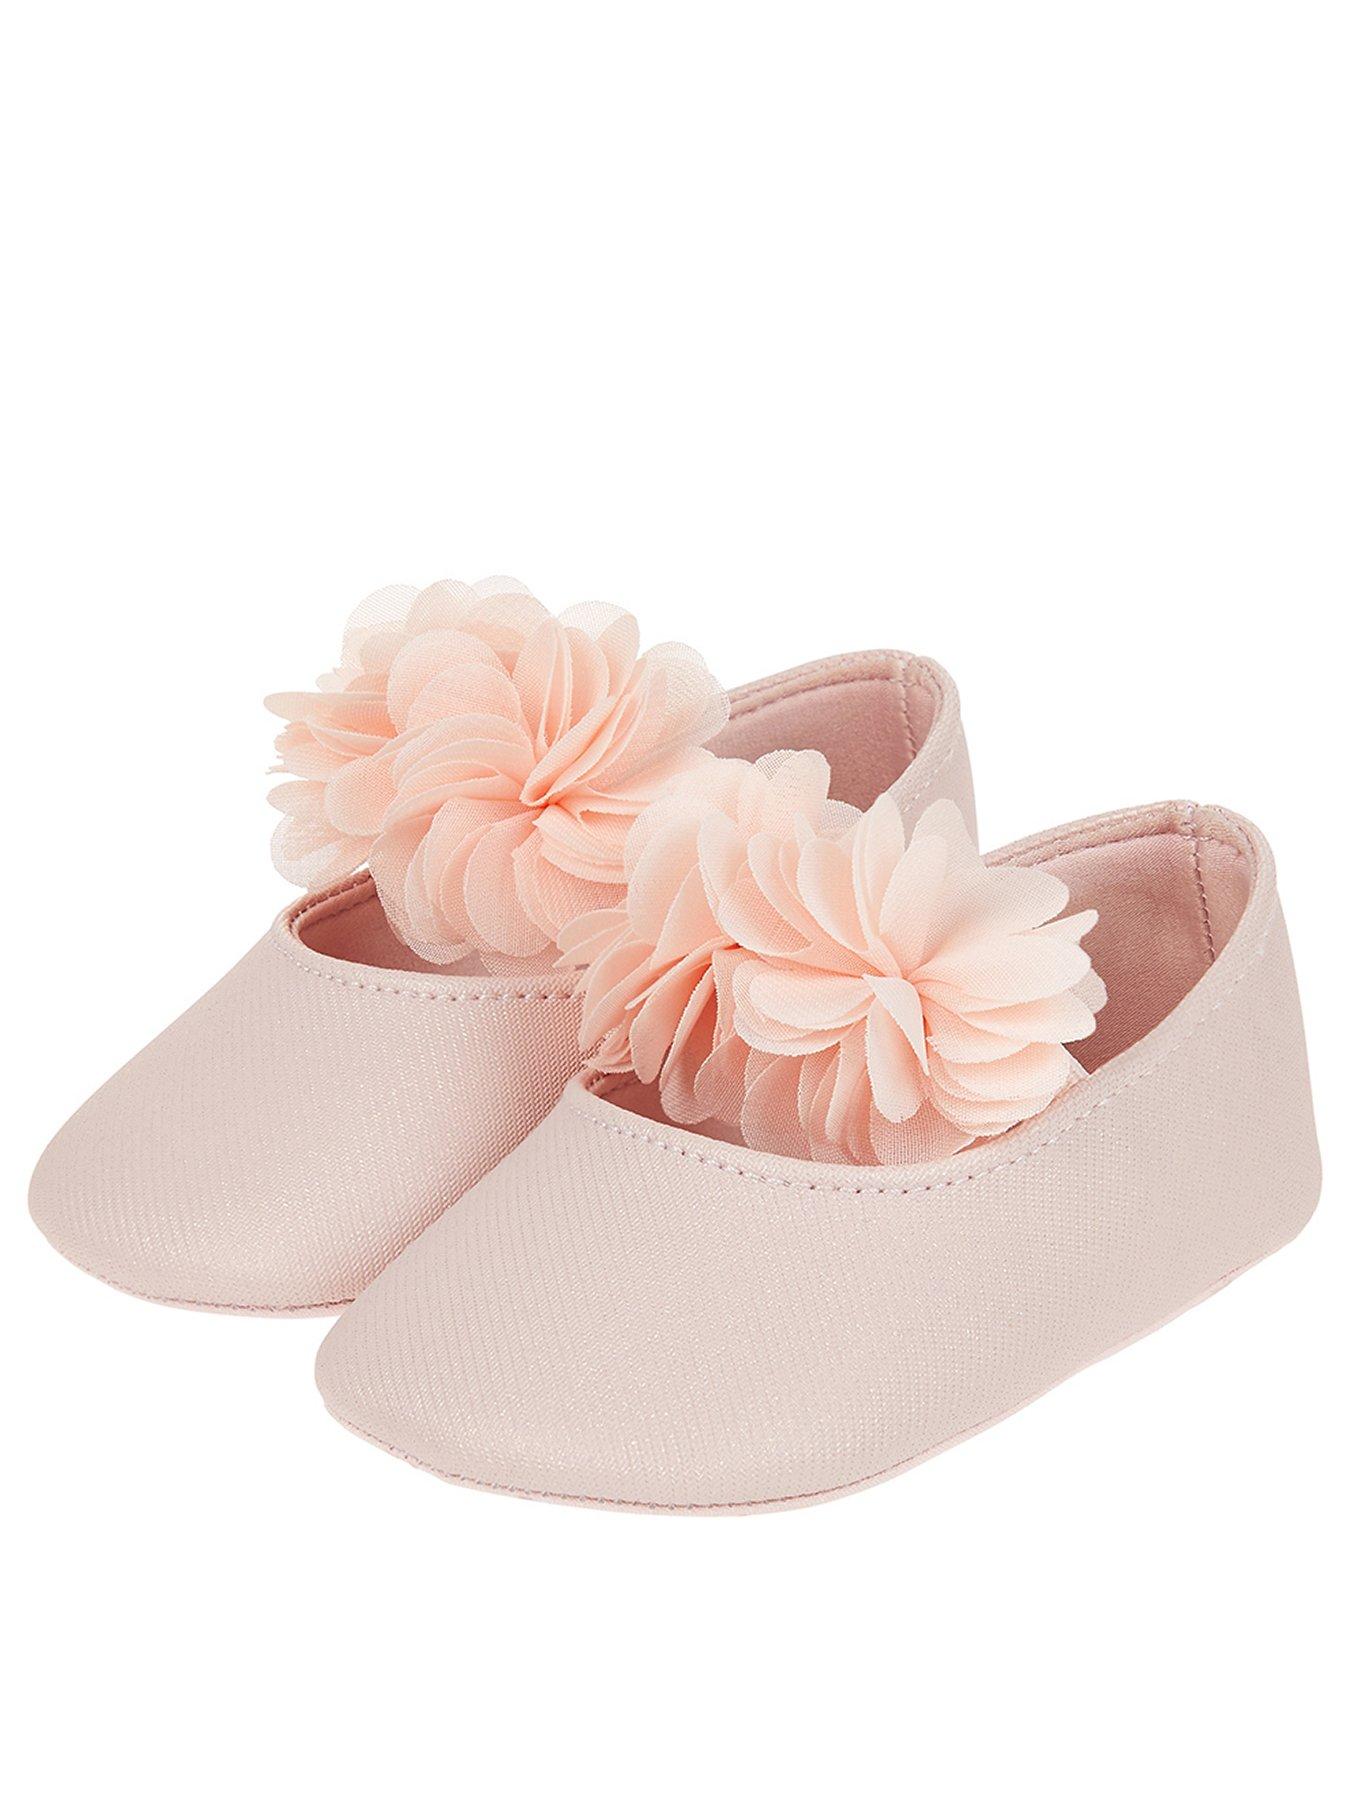 baby shoes uk